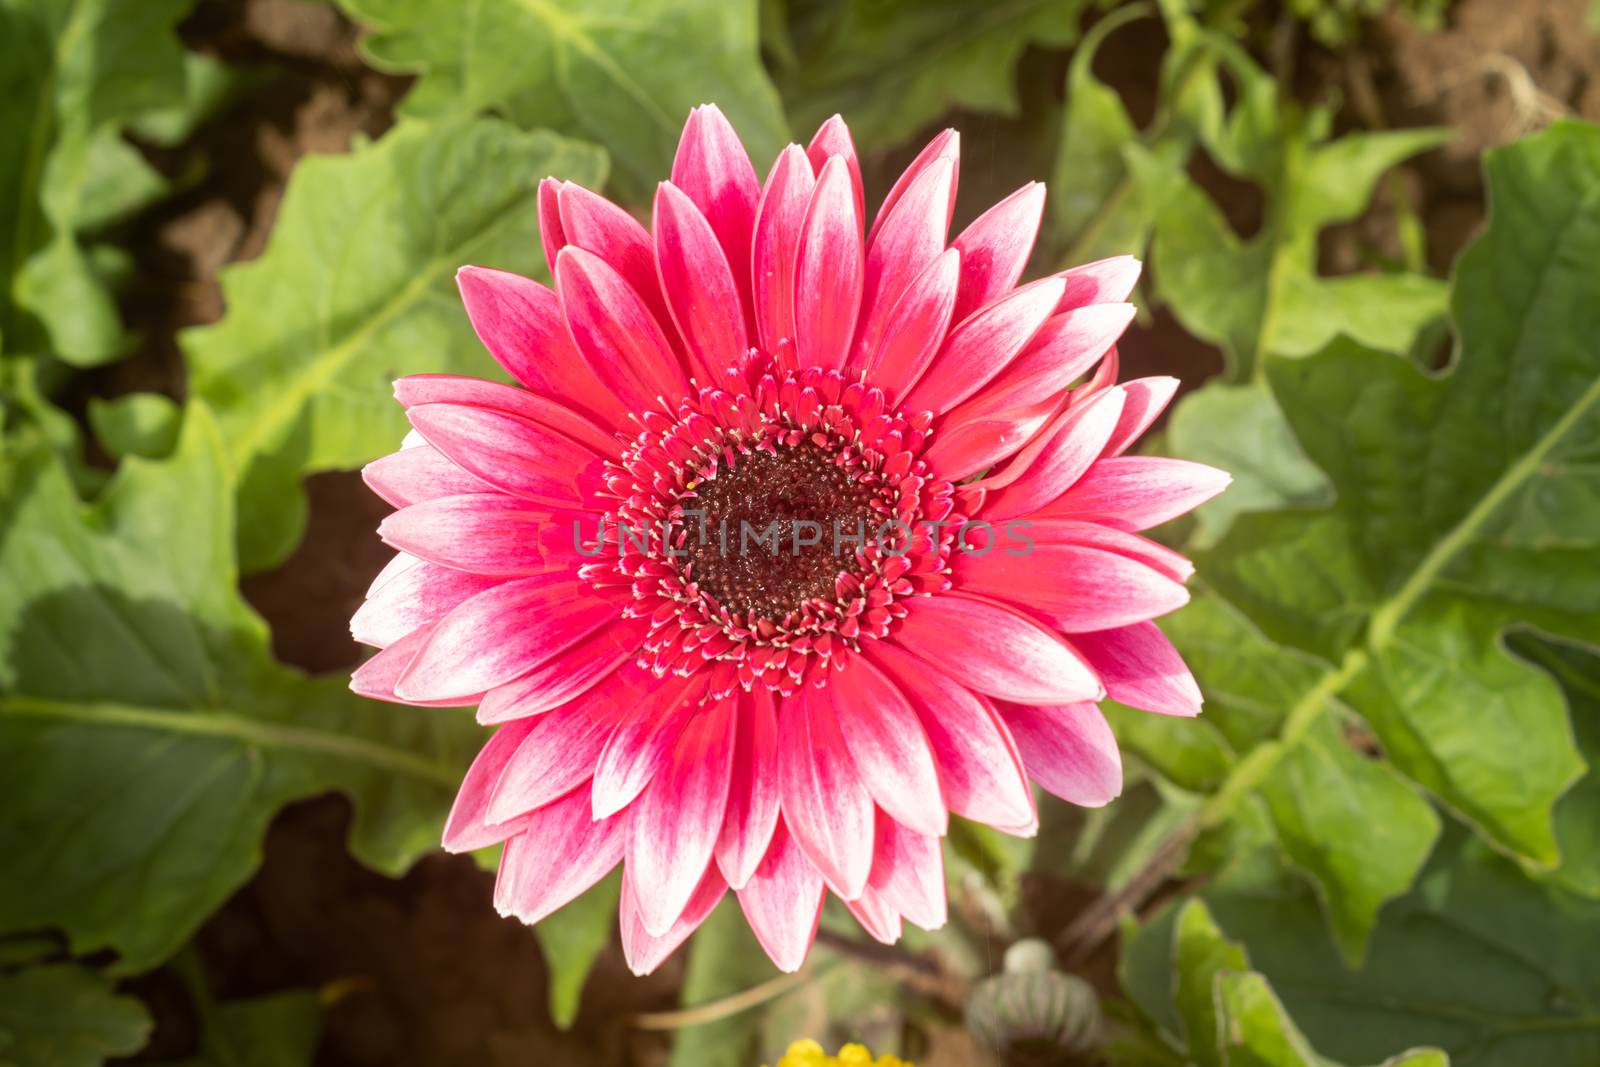 Red Gerbera Daisy or Gerbera Flower in Garden with Natural Light on Green Leaves Background